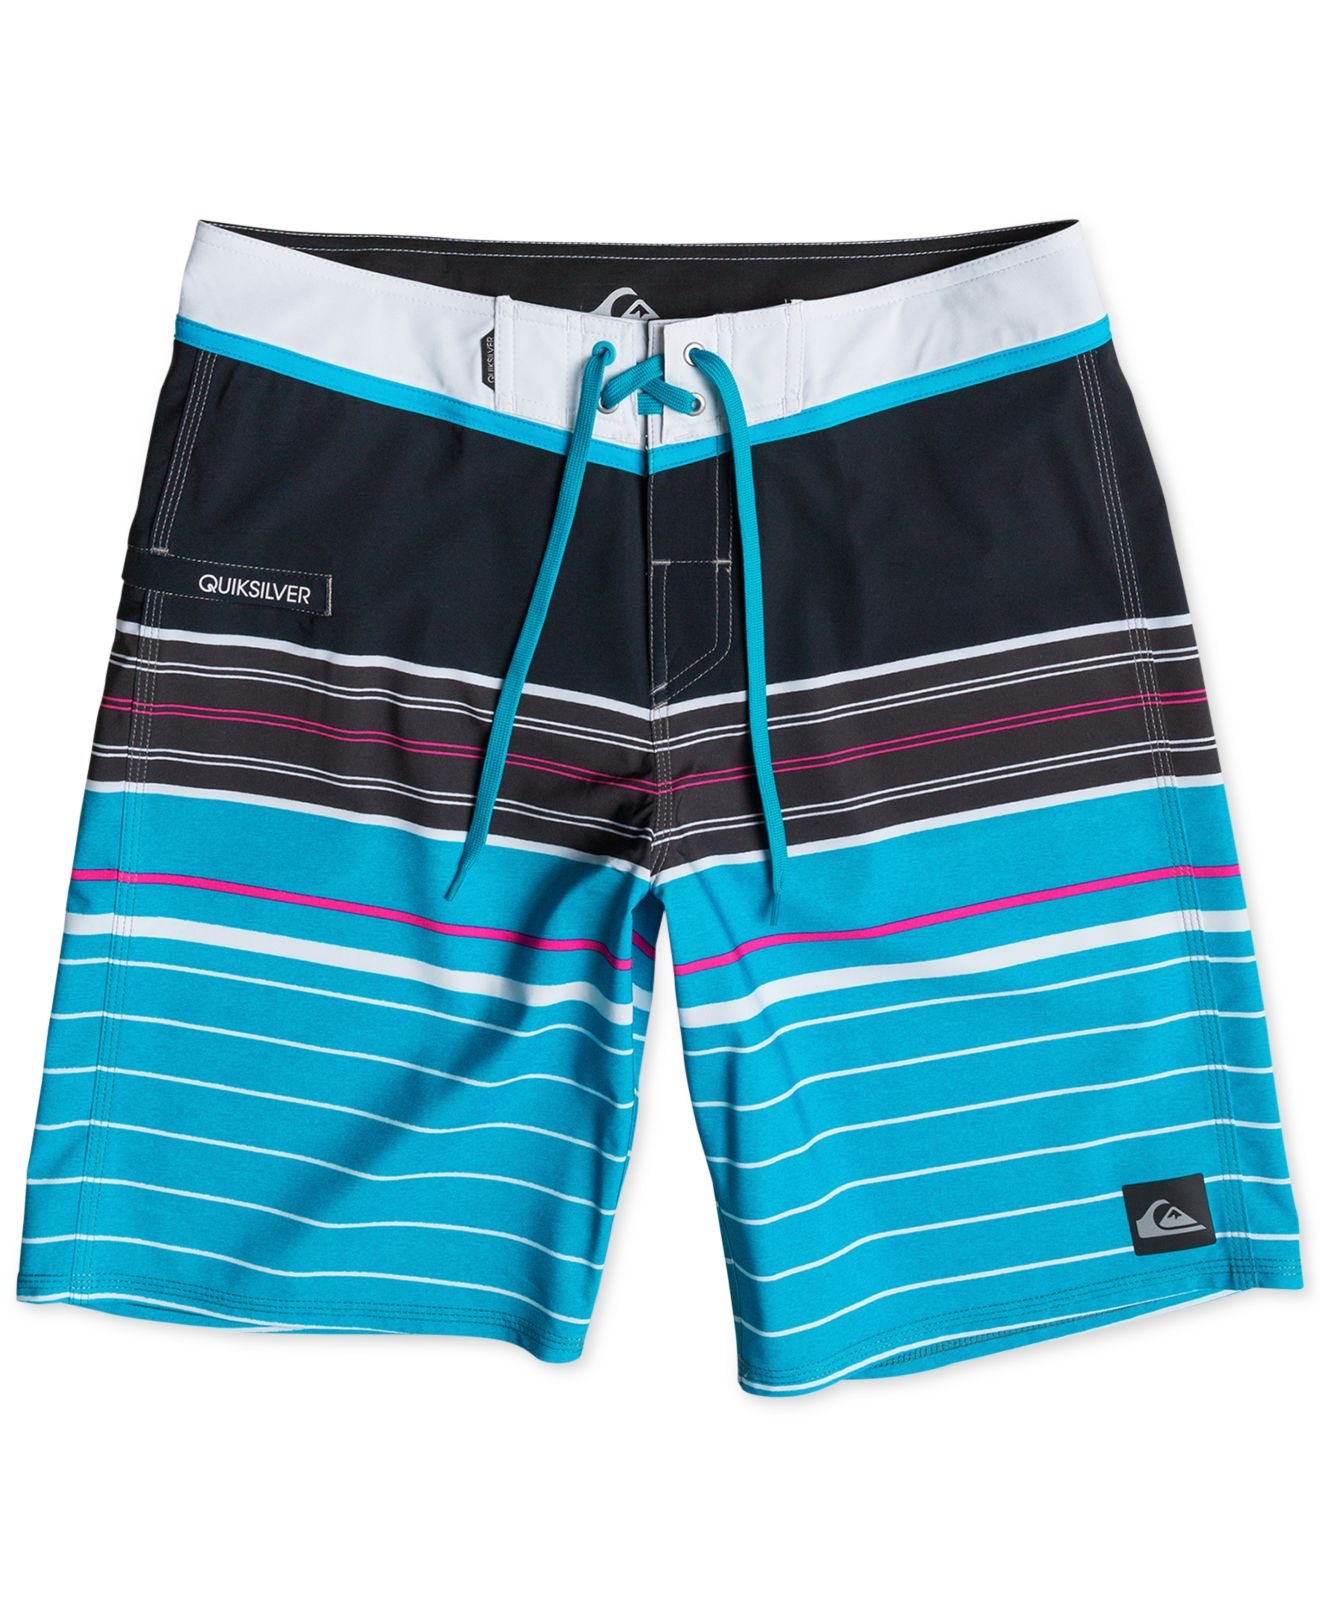 Quiksilver Yg Striped 21